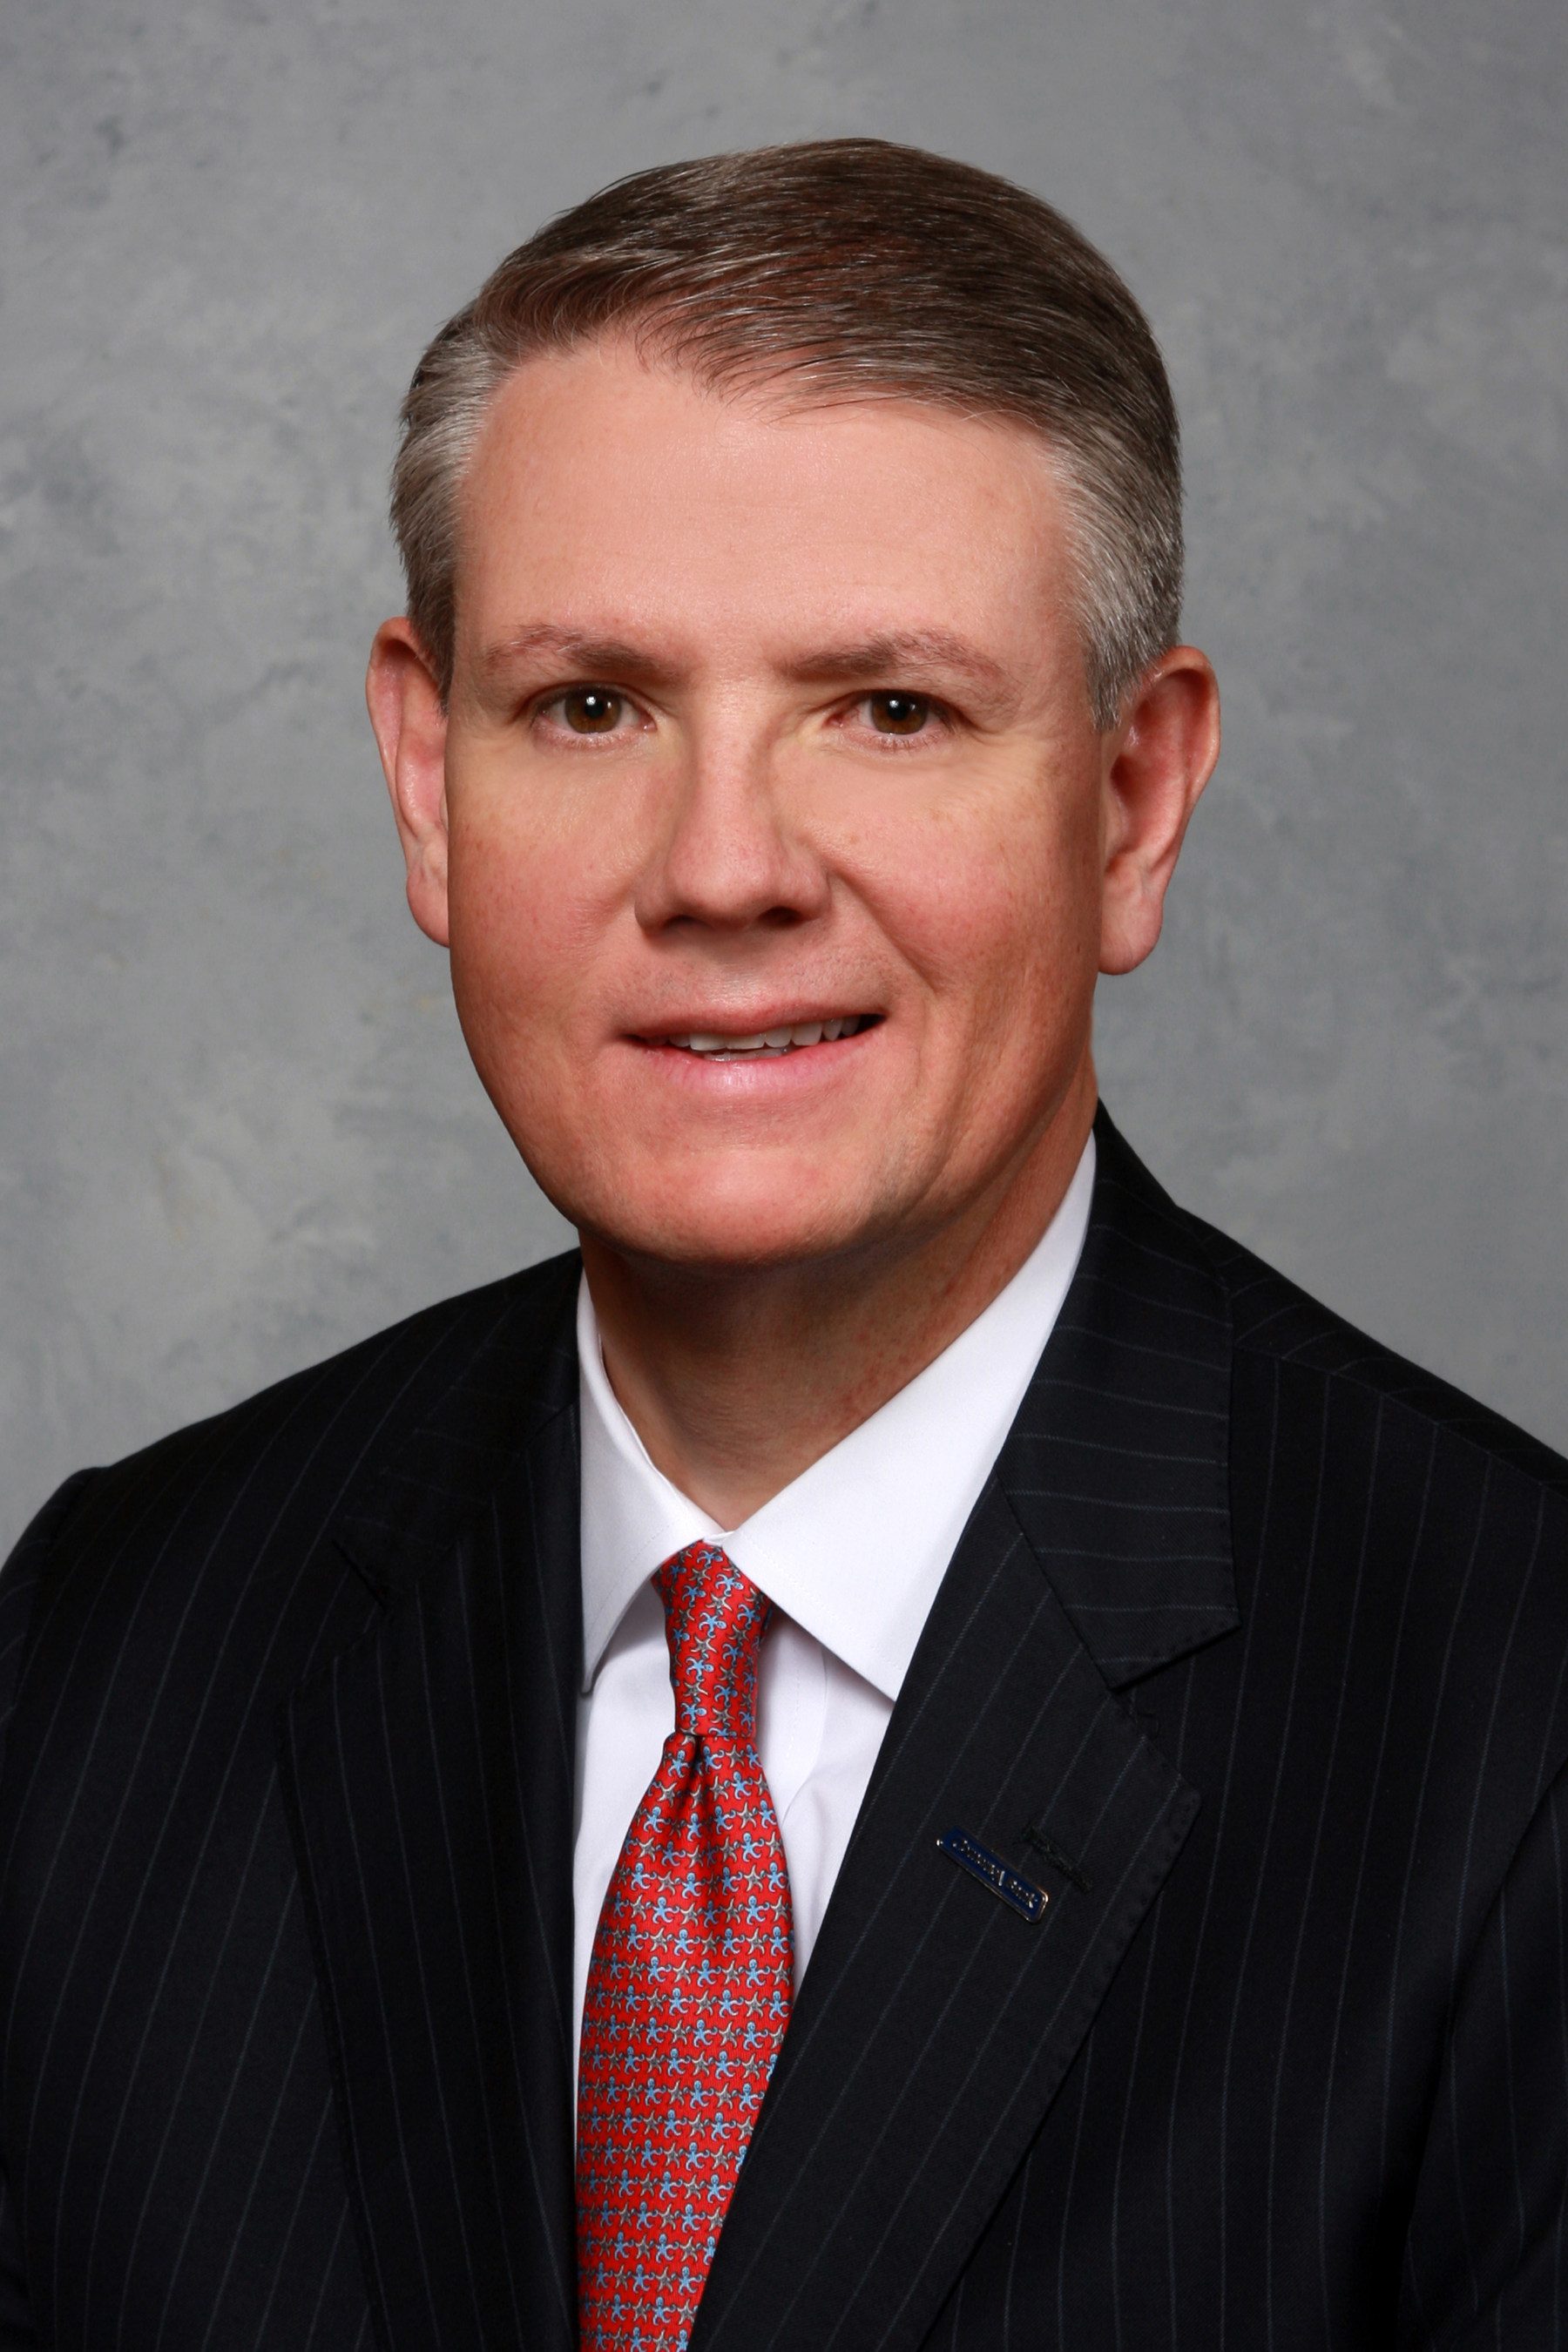 Curtis C. Farmer has been named President of Comerica Incorporated and Comerica Bank.